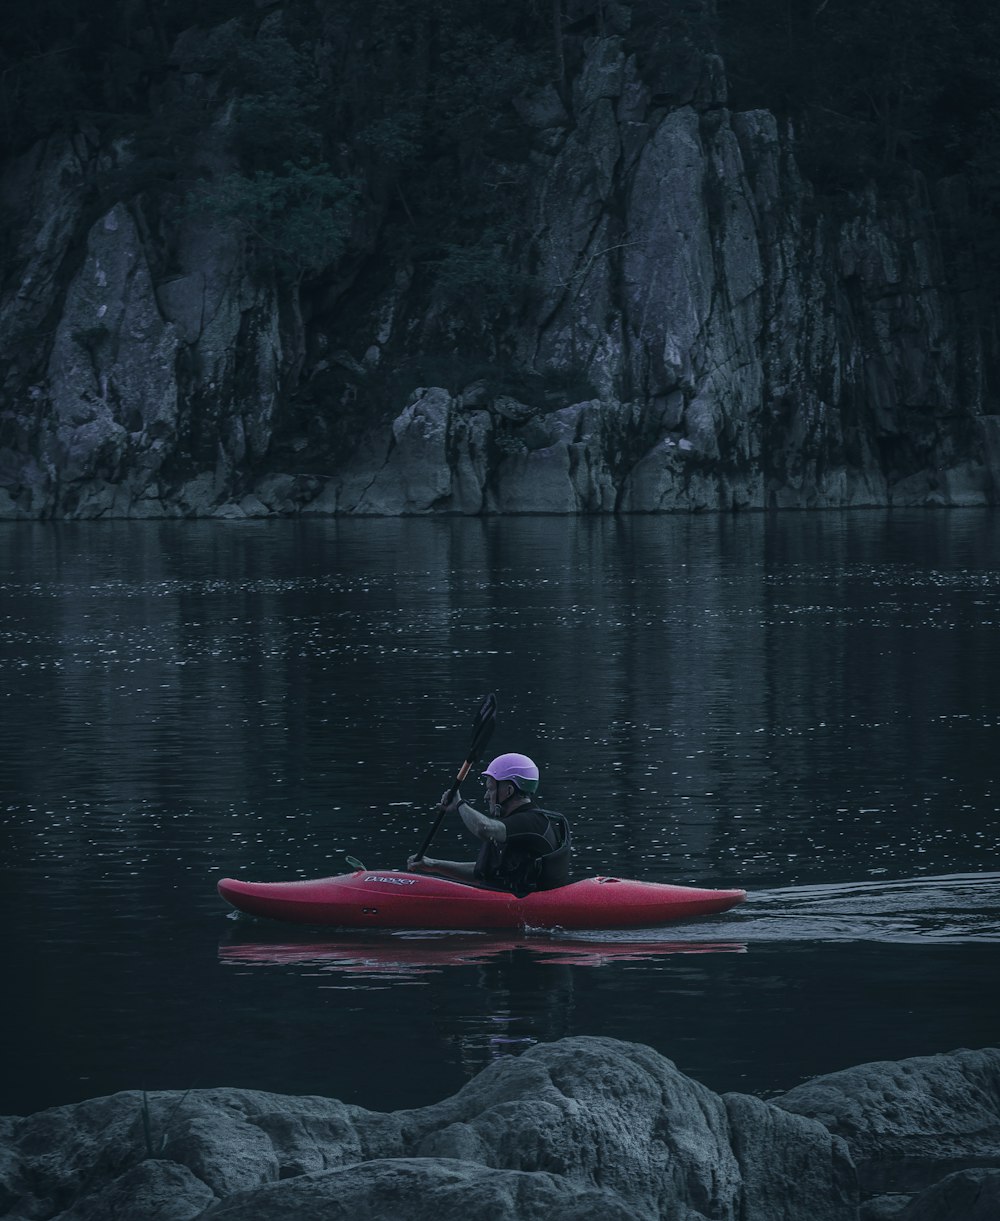 a person in a red kayak on a body of water